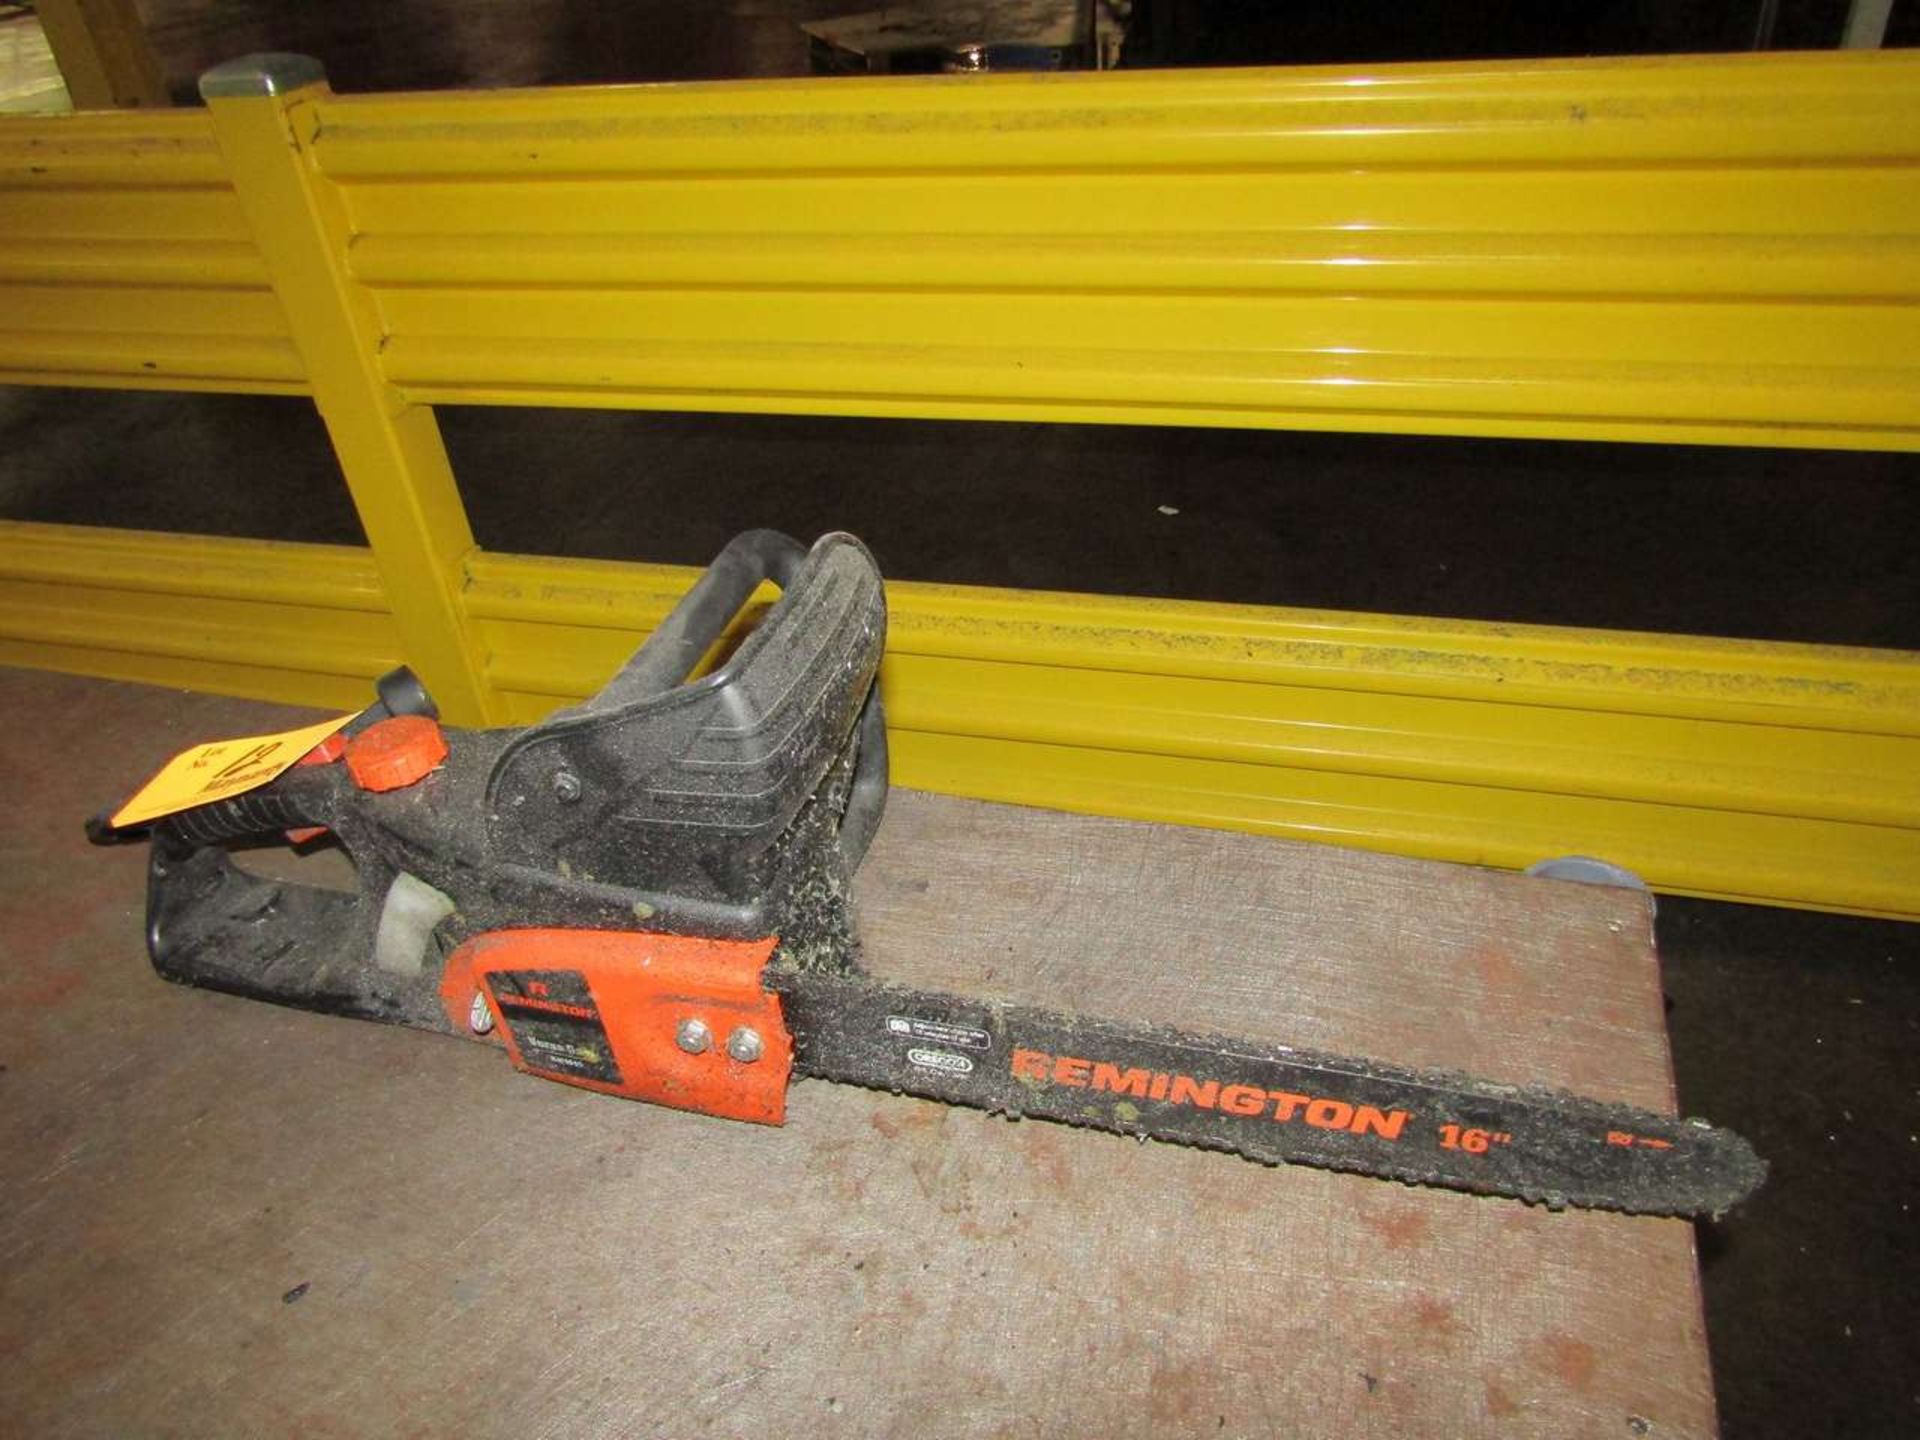 Remington RM1645 16'' Electric Chain Saw - Image 2 of 2